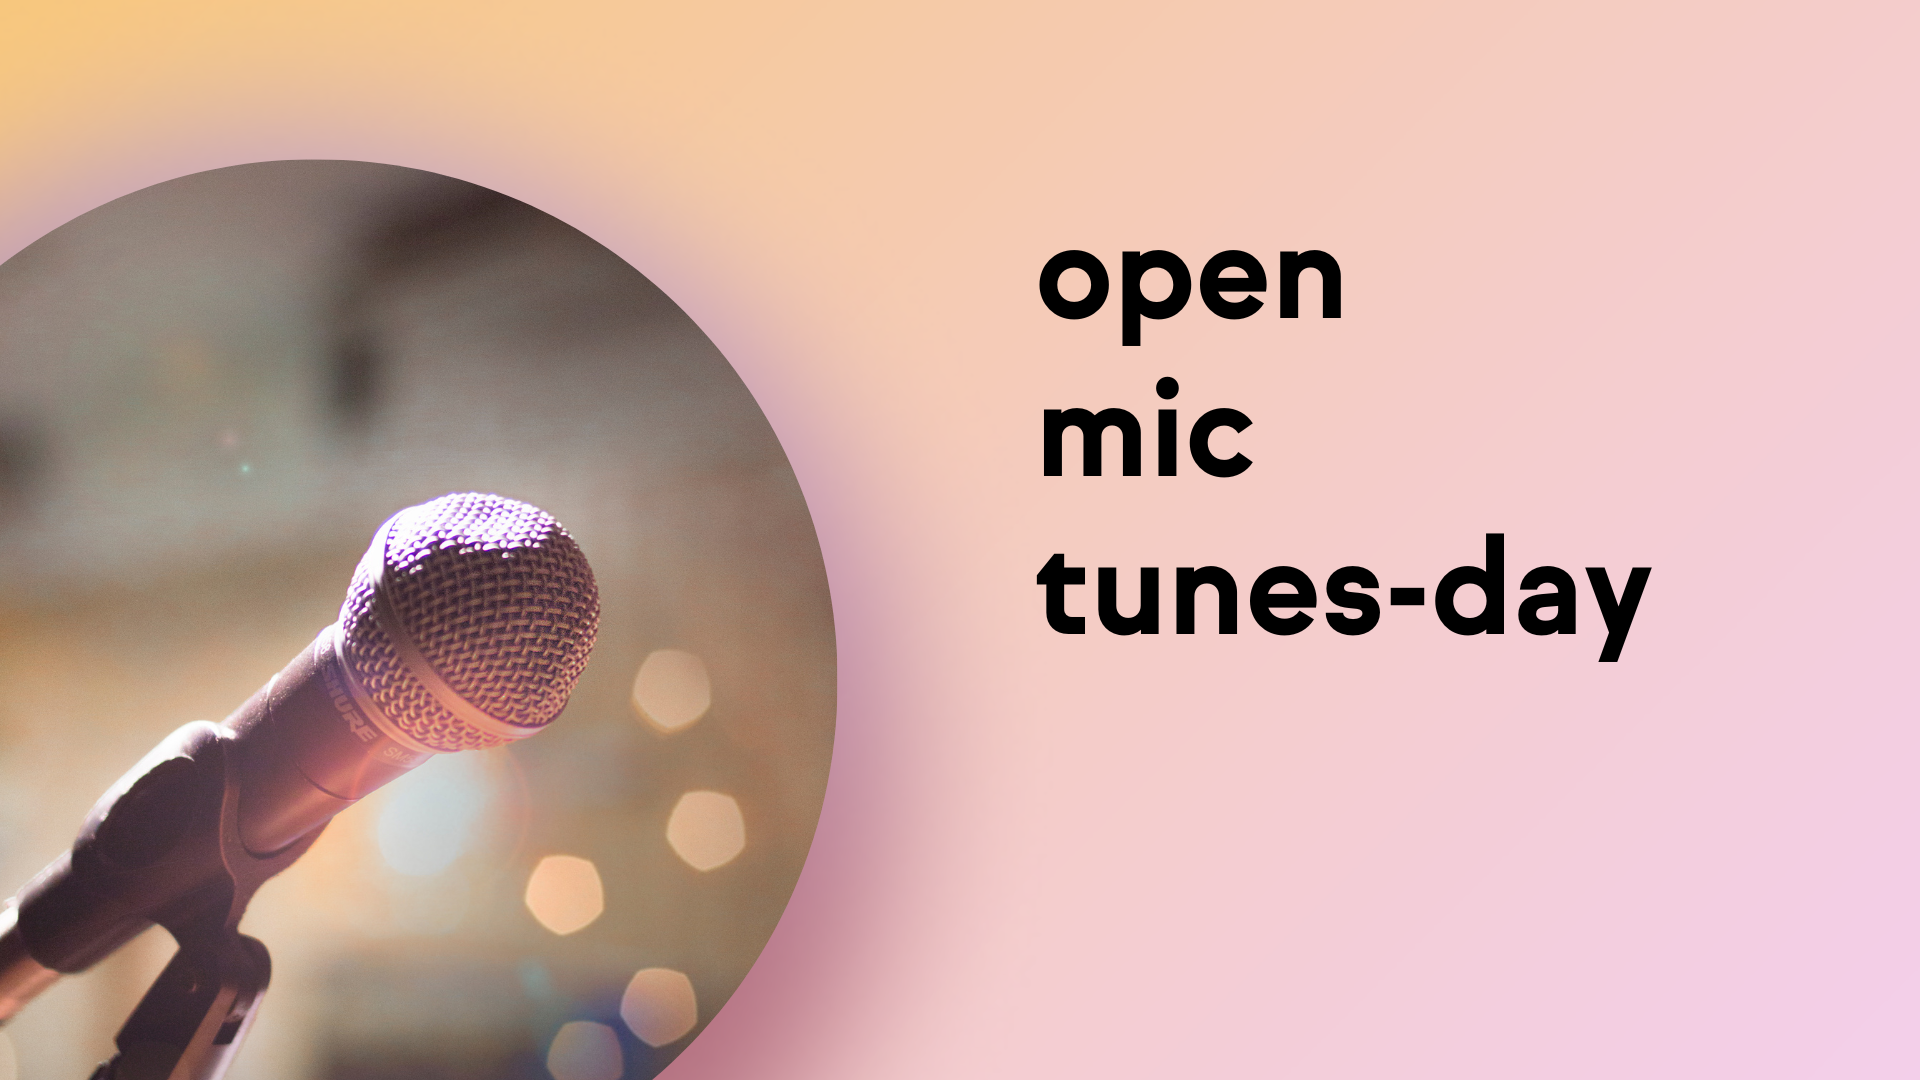 Image of a microphone in a circular cutout against a yellow and pink gradient background, with text to the right of the microphone image which reads "open mic tunes-day."